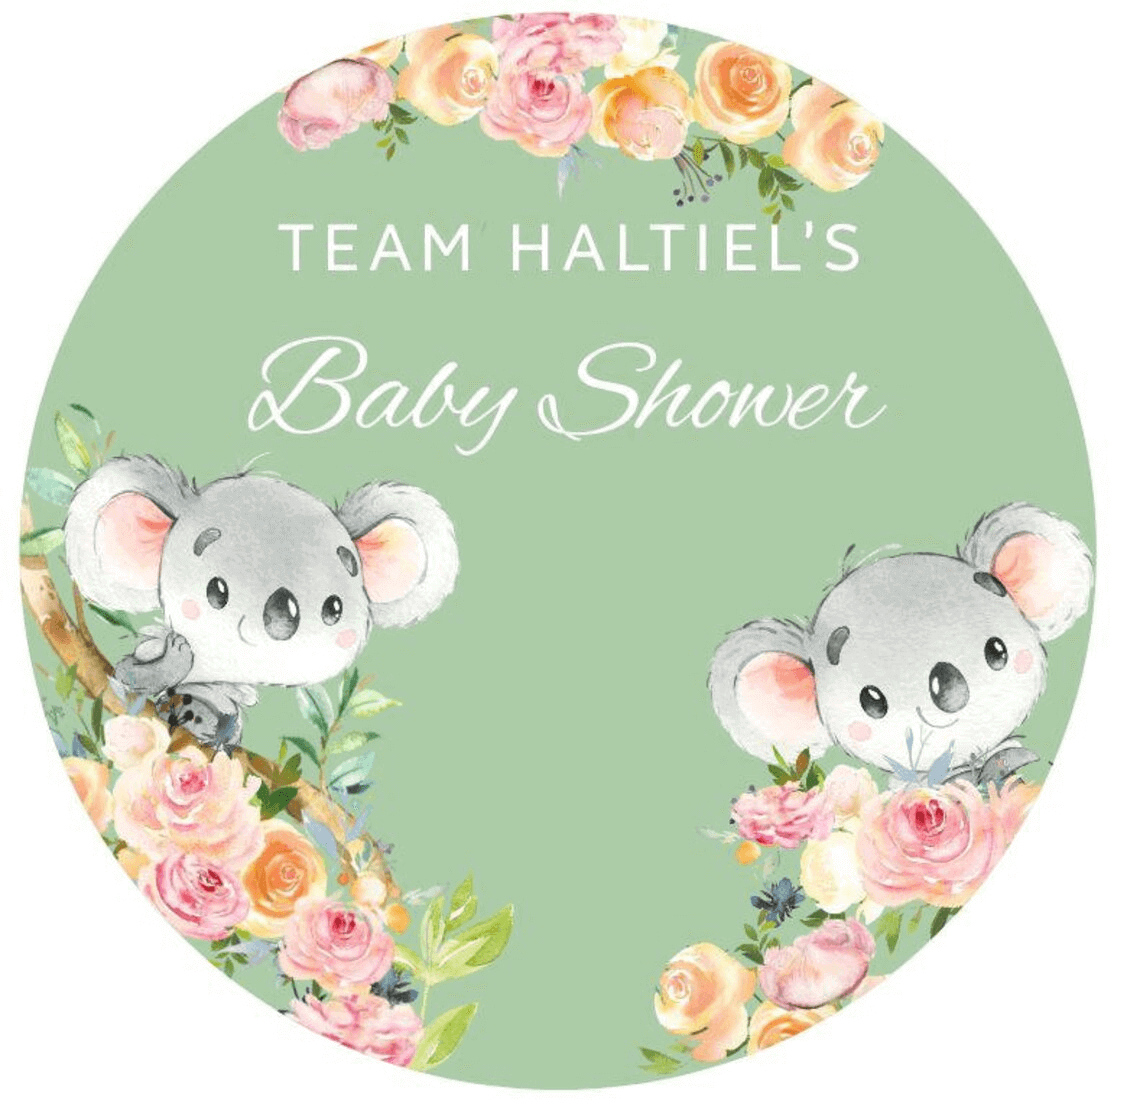 Koala and Floral Baby Shower Round Backdrop